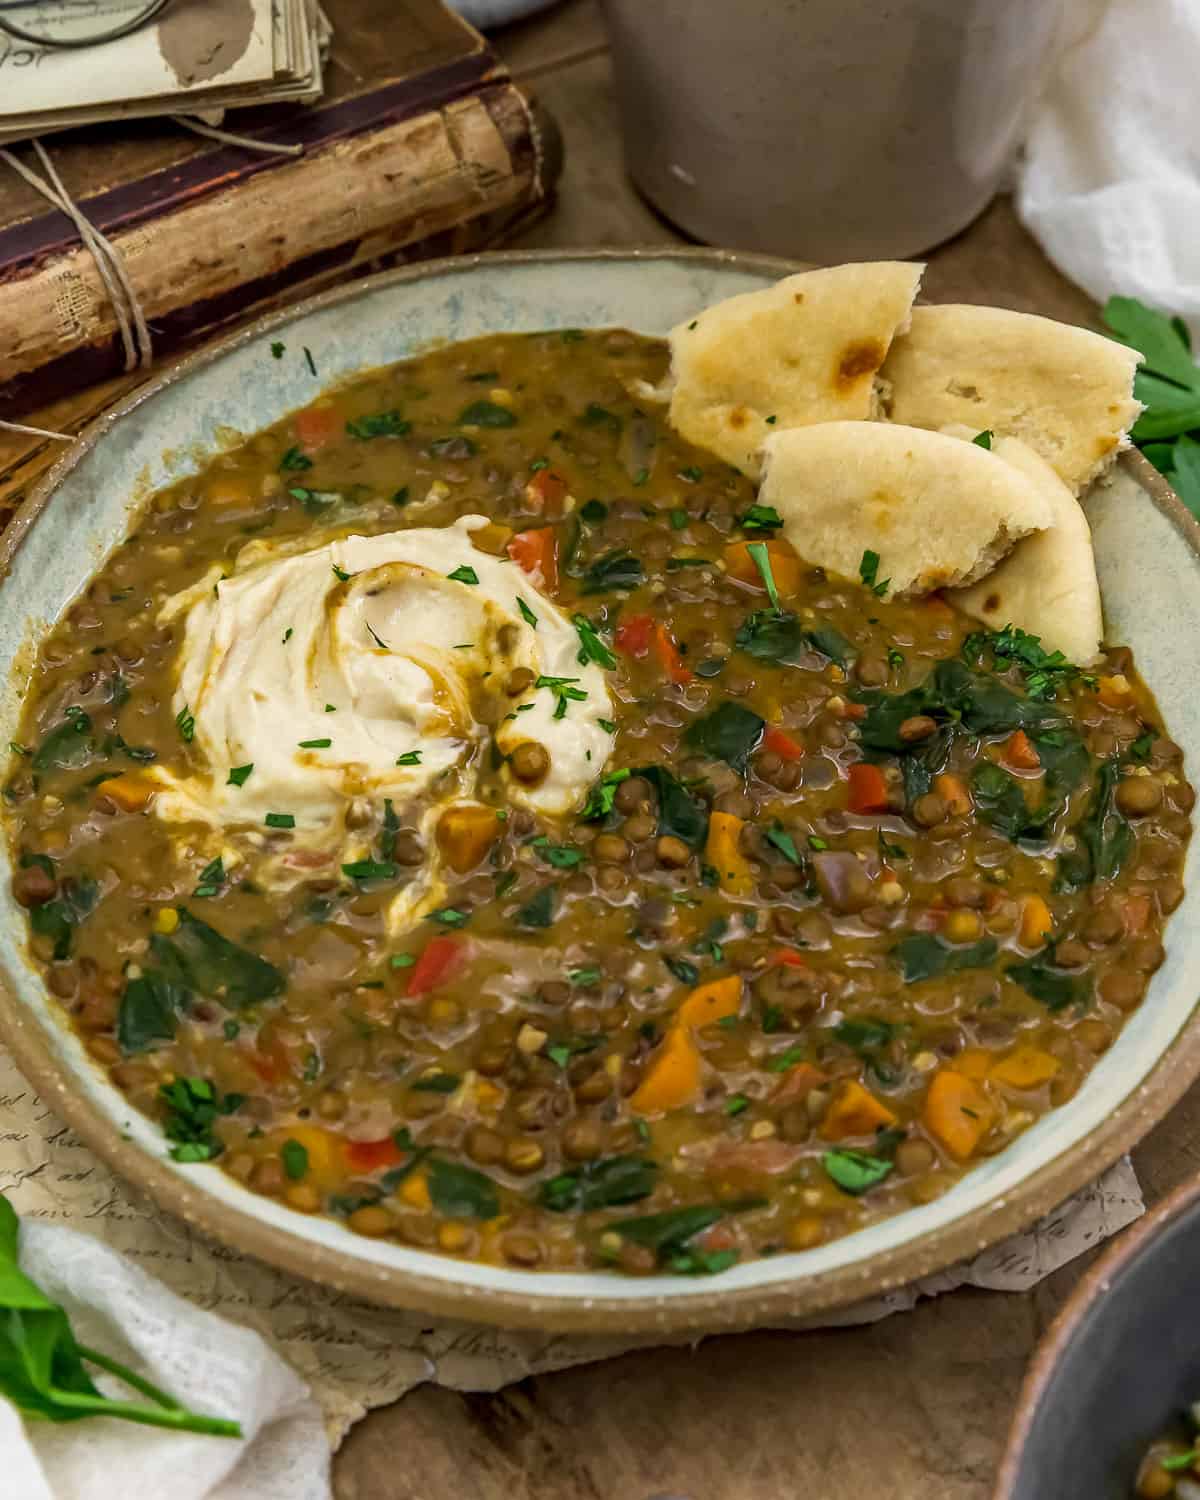 Harissa Spiced Lentil Curry with pita